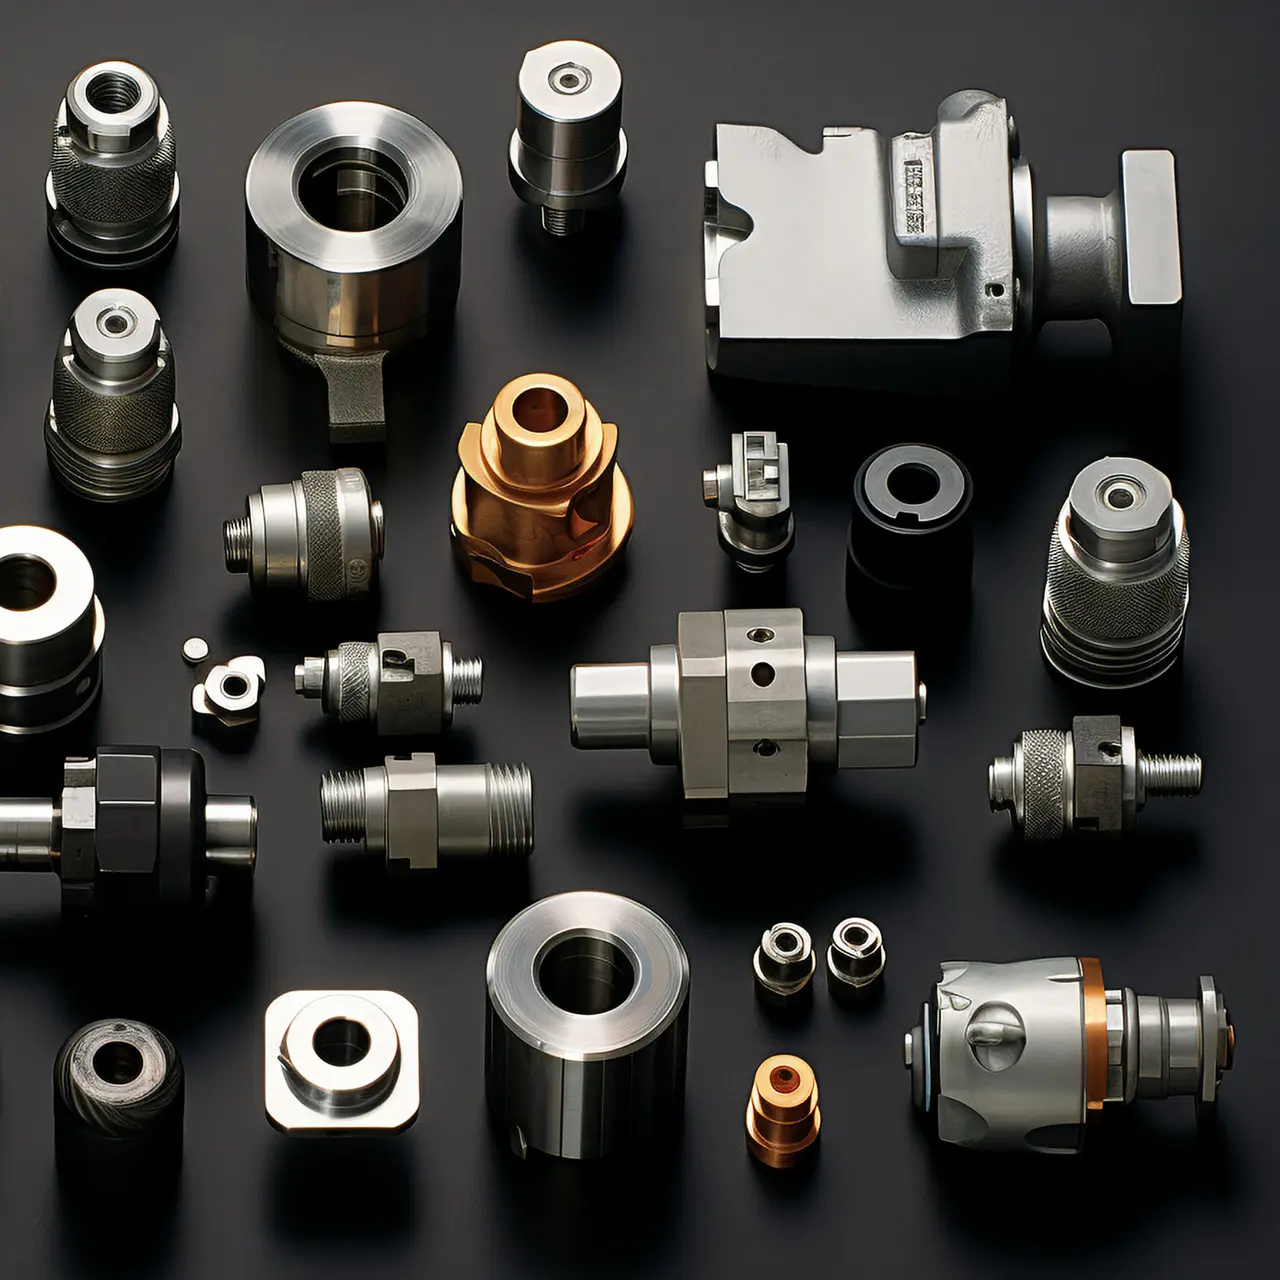 Automotive metal parts manufacturers professional CNC parts processing stainless steel 316 rapid prototyping services